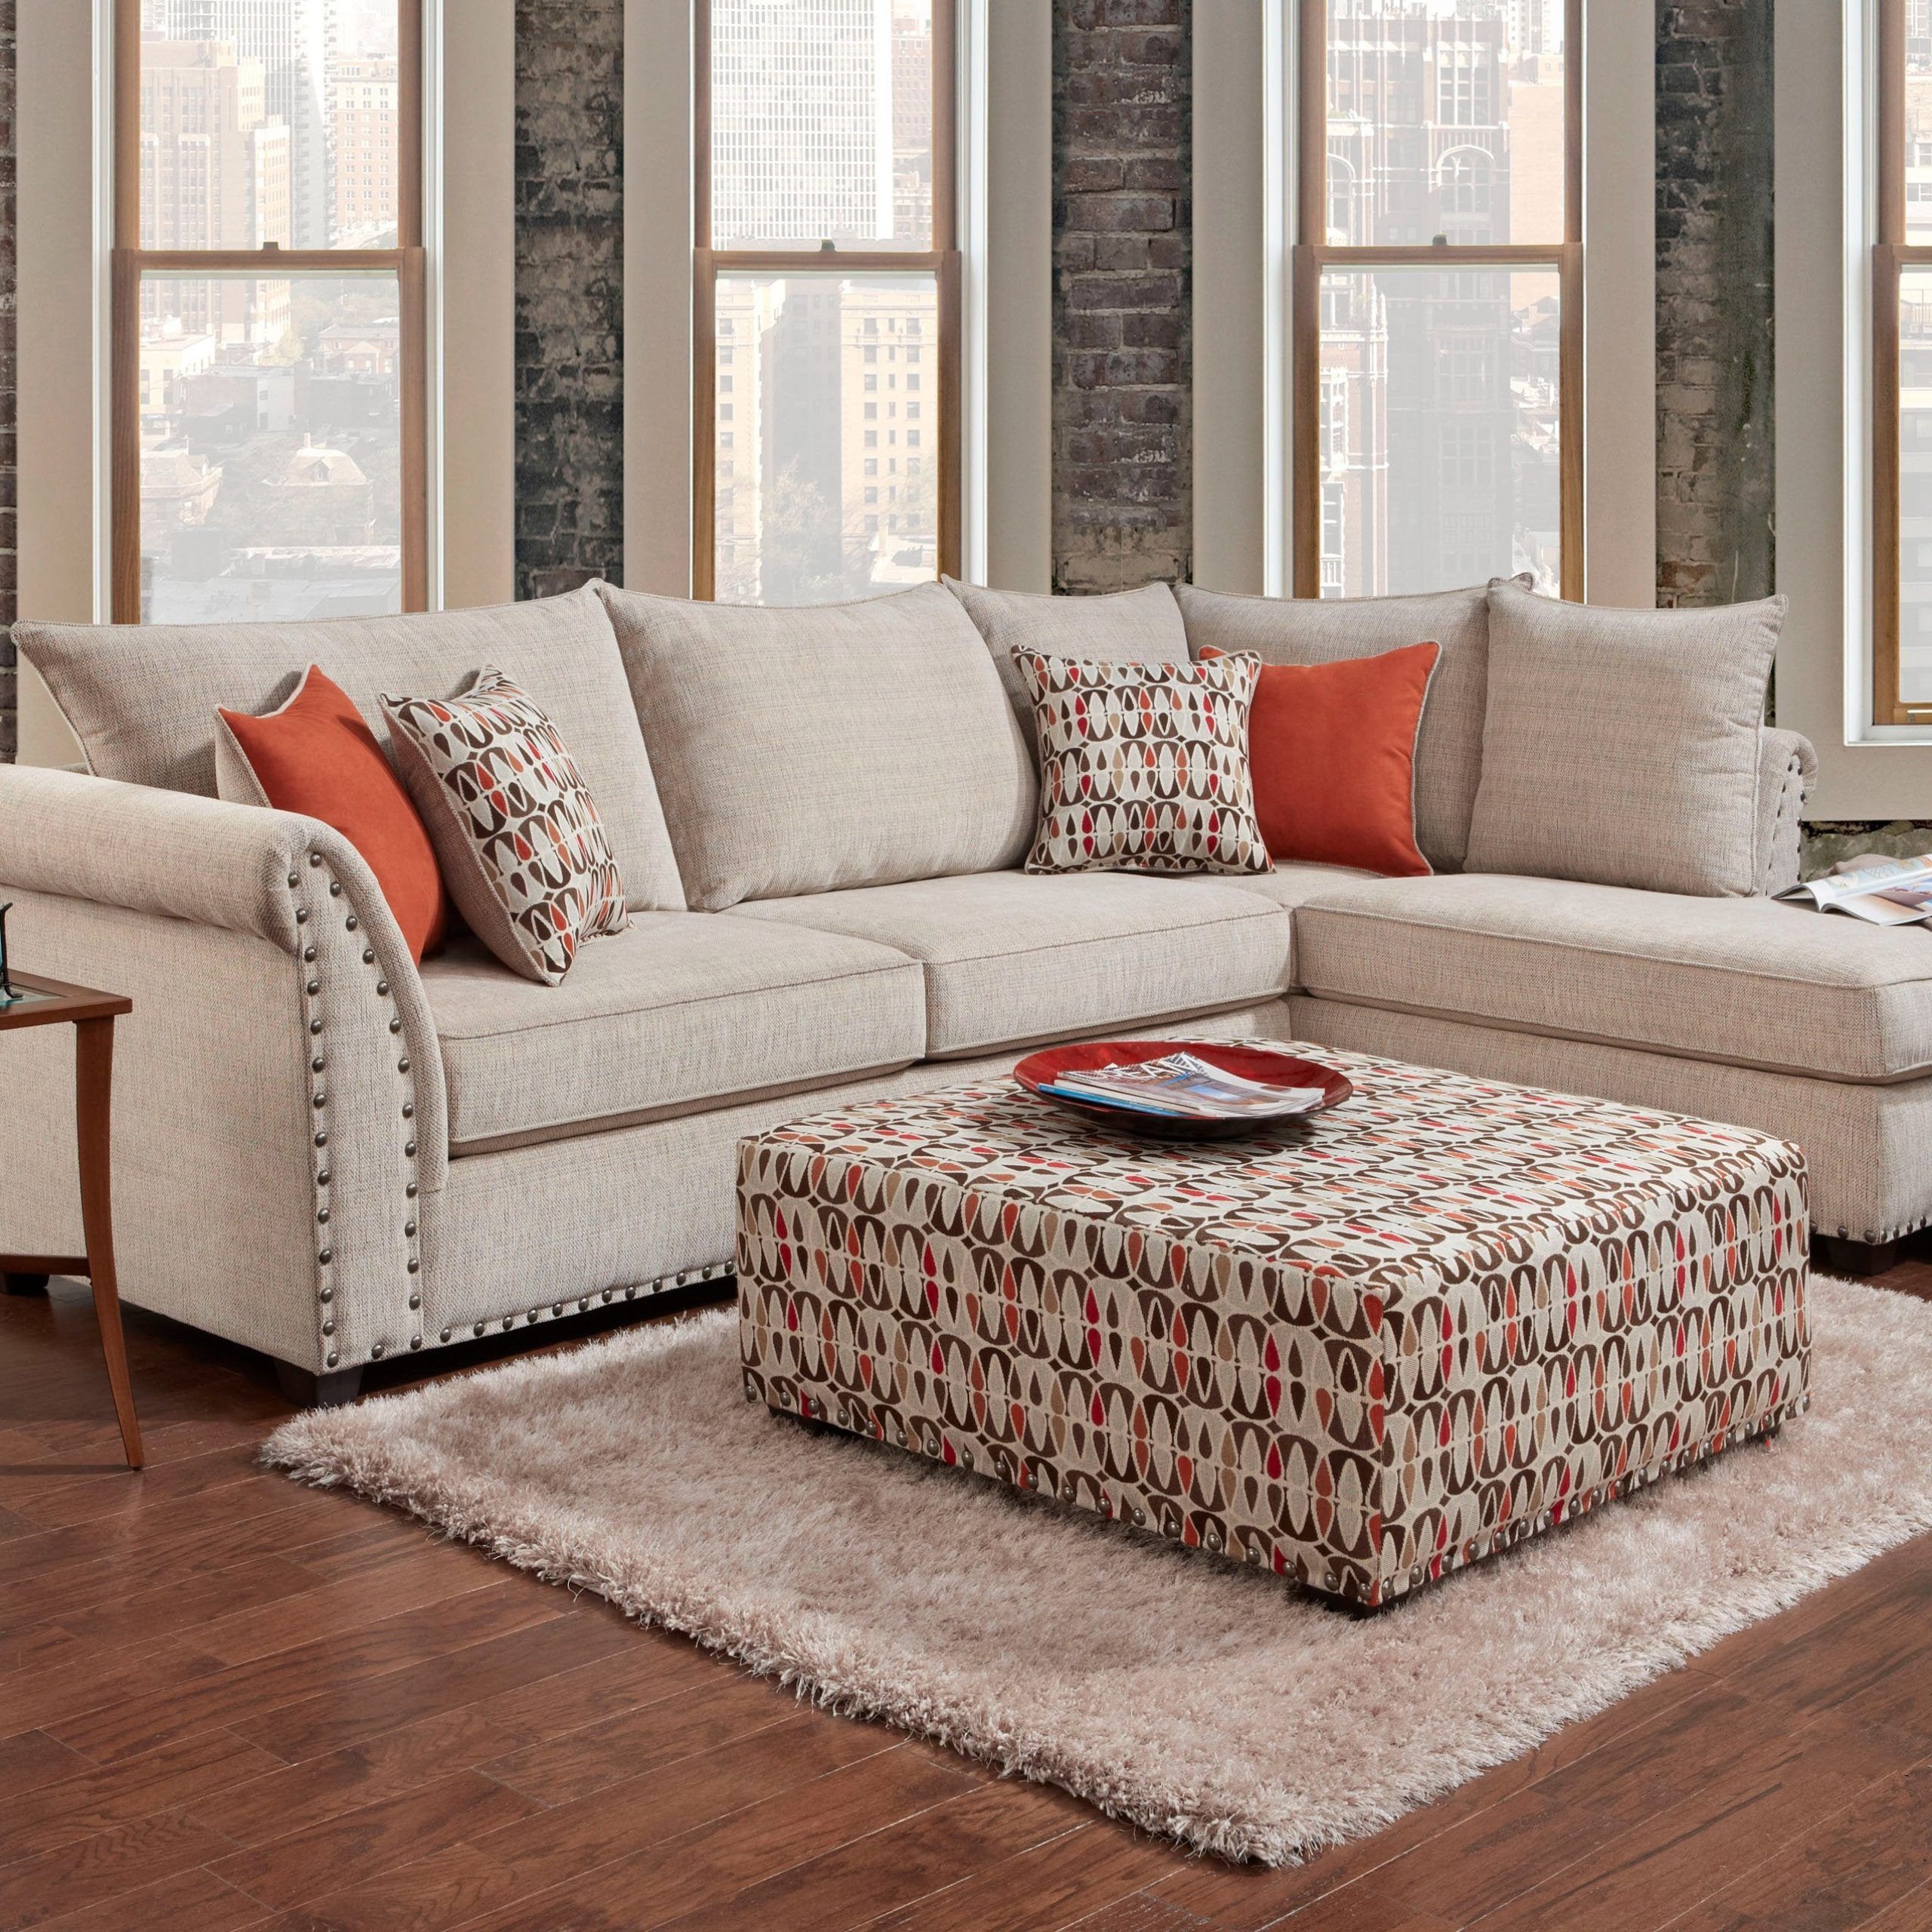 Patton Beige Sectional Sofa Set – Afurniturecompany Pertaining To Small L Shaped Sectional Sofas In Beige (View 5 of 21)